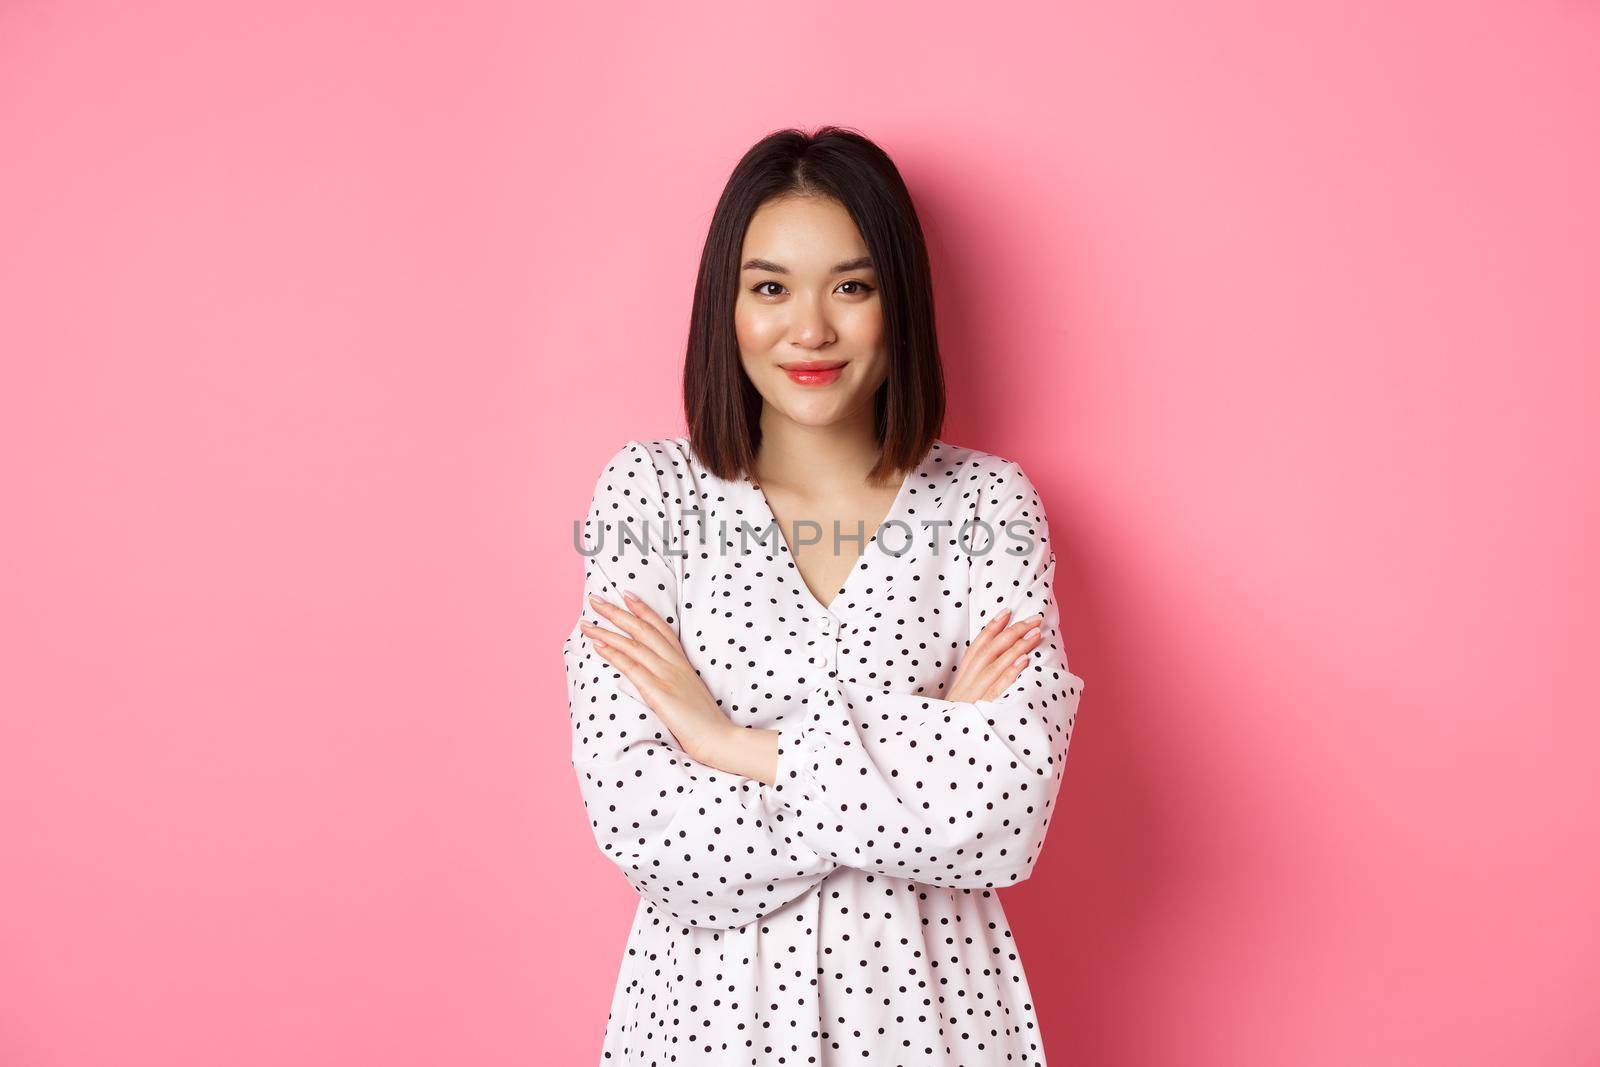 Beautiful asian female model standing in dress, cross arms on chest and smiling at camera, standing over pink background.